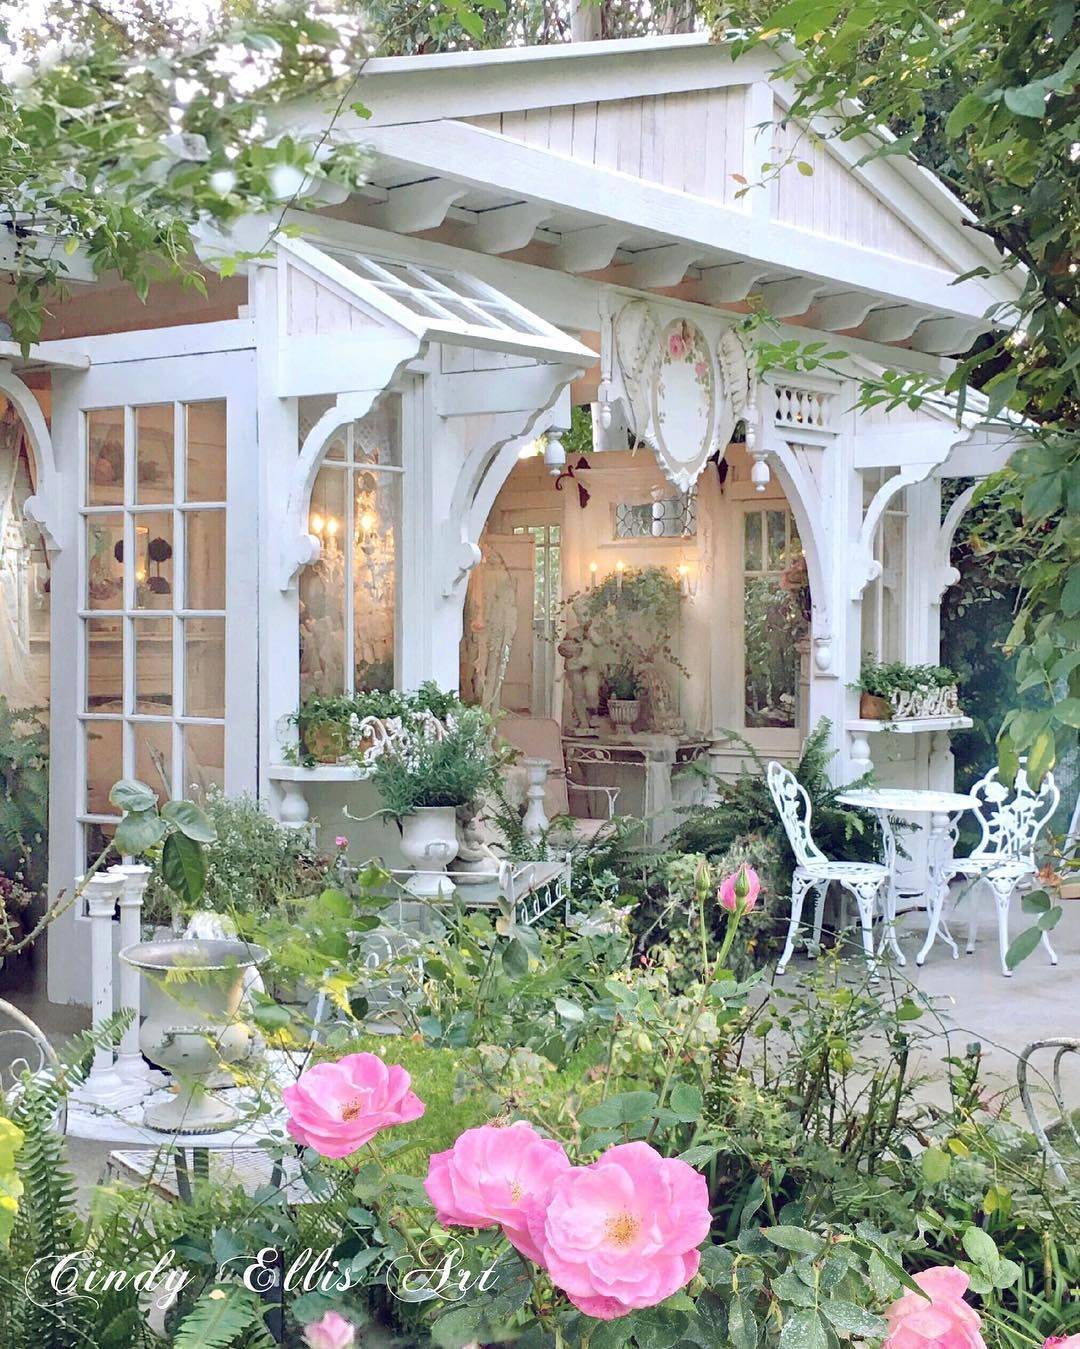 A Shabby Chic Garden Shed